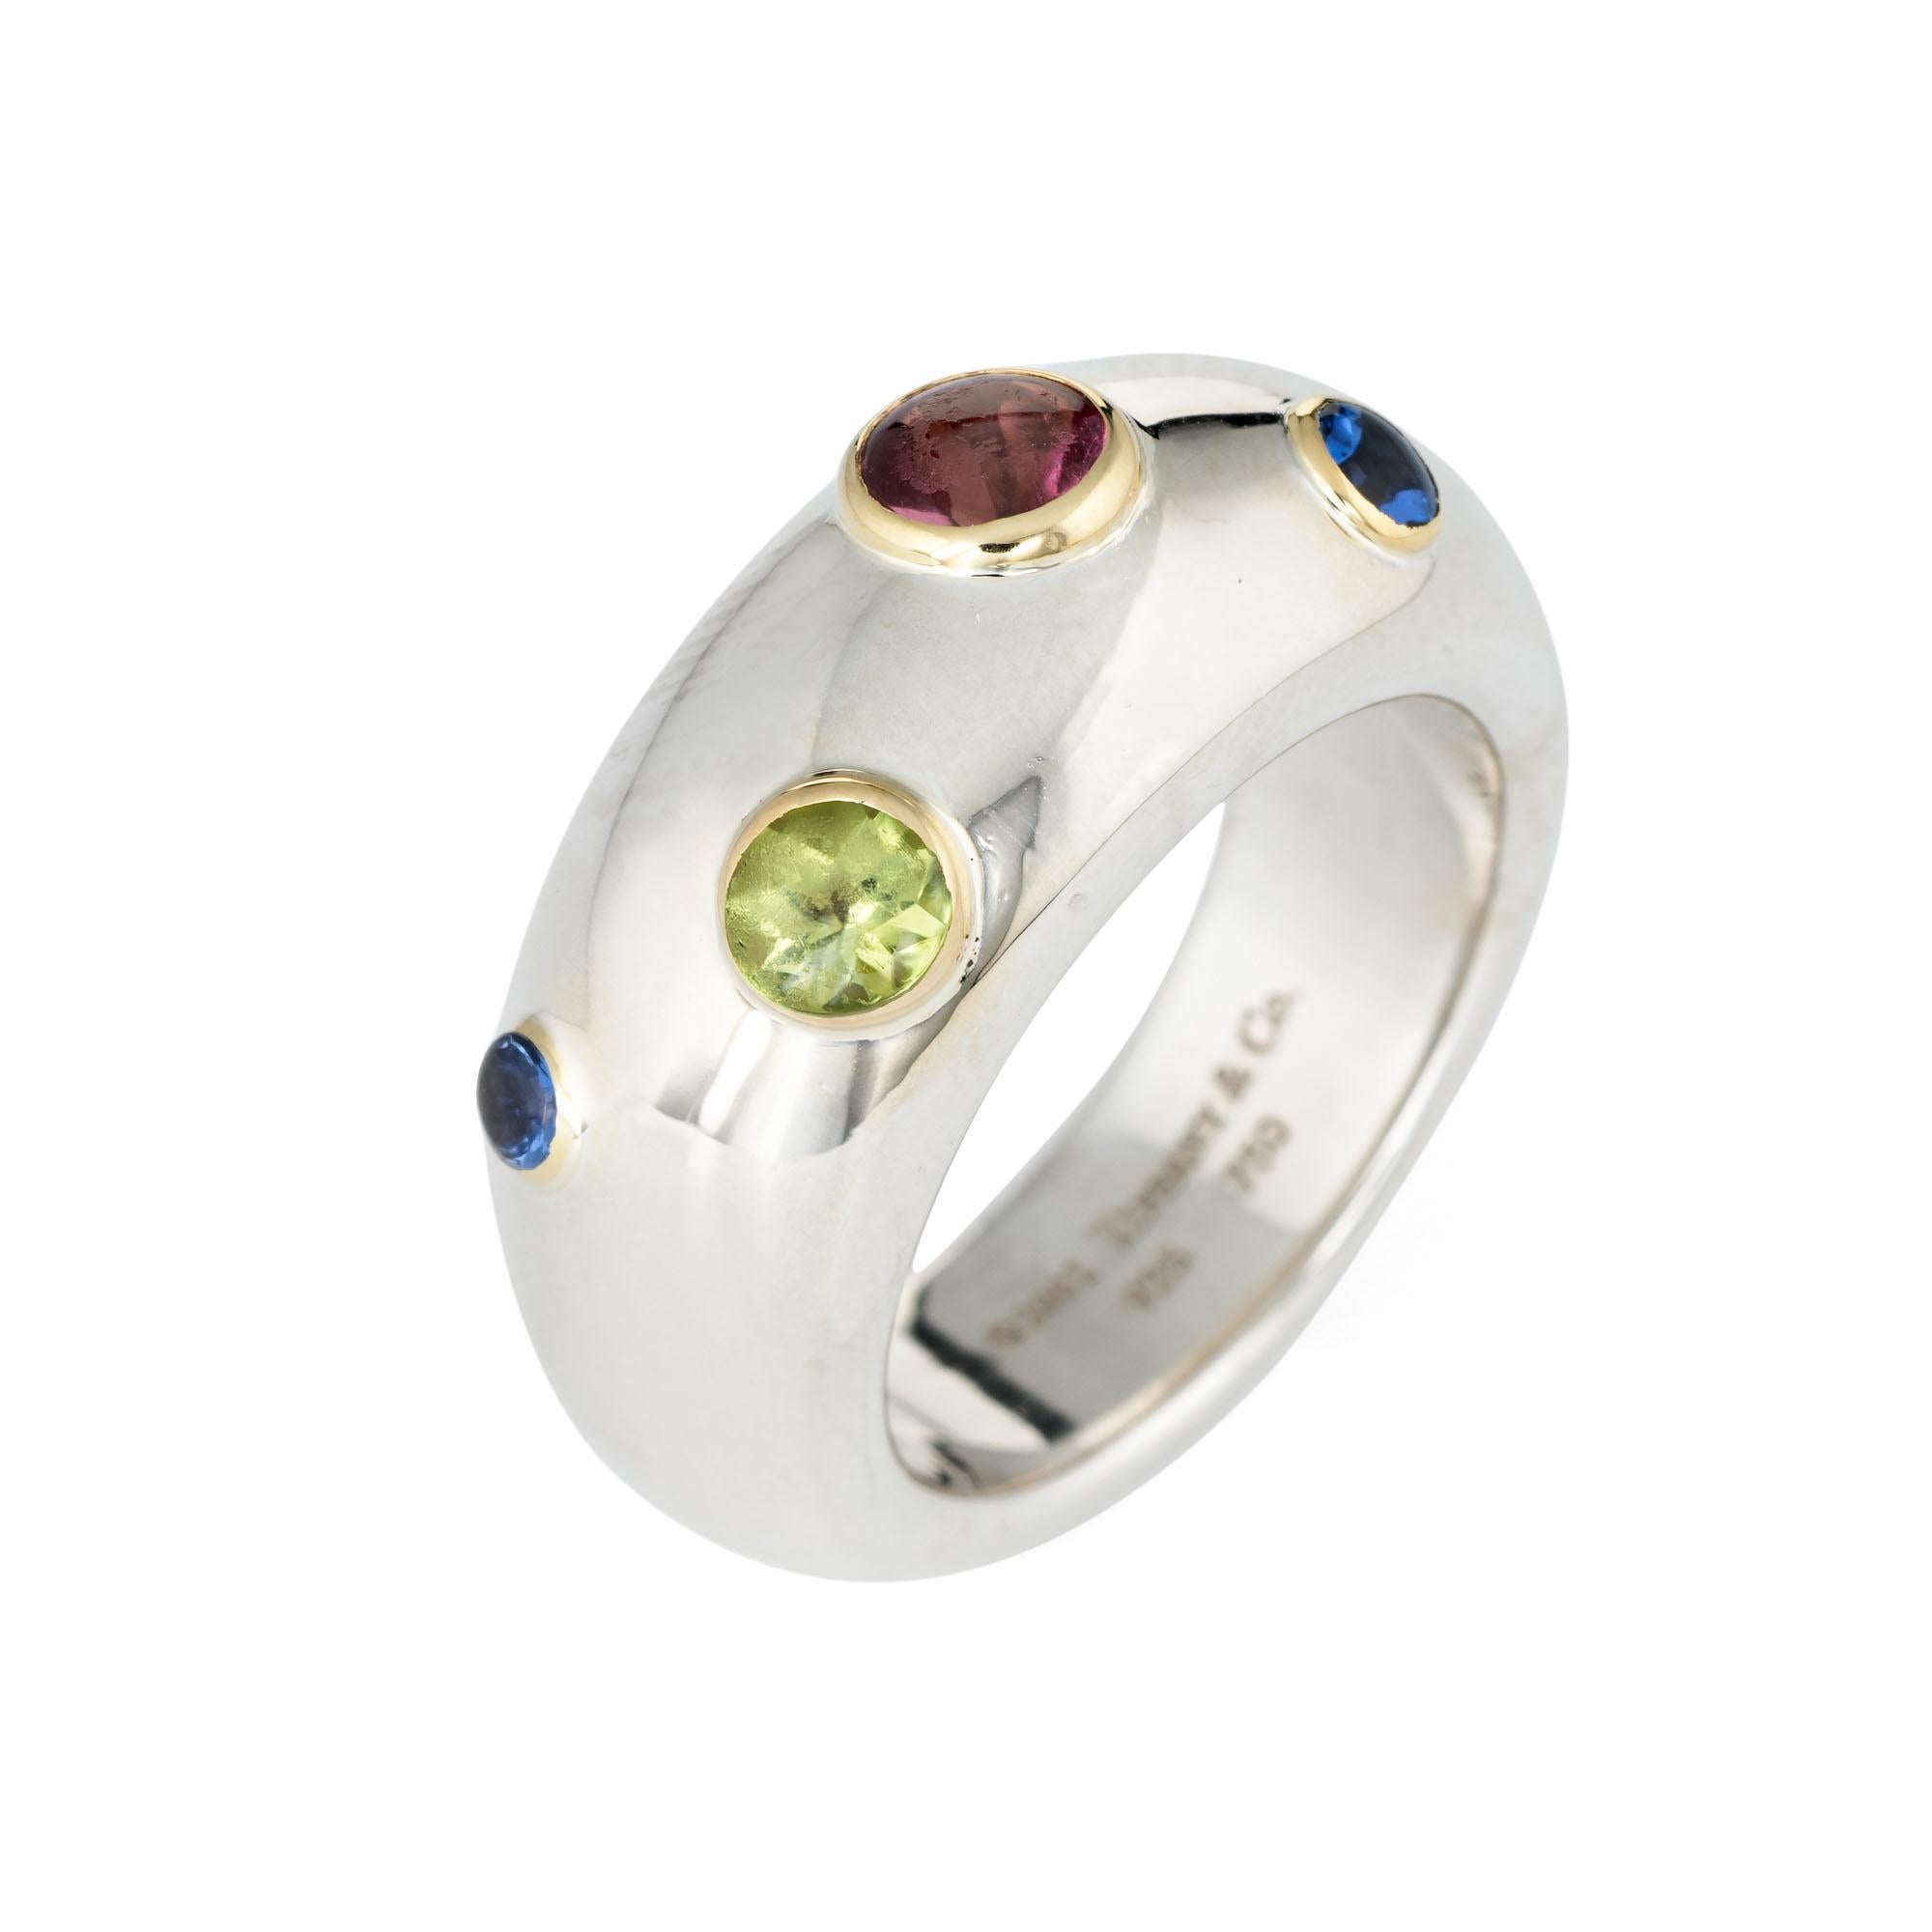 Finely detailed estate Tiffany & Co gemstone ring (circa 2001) crafted in sterling silver & 18 karat yellow gold. 

Cabochon cut sapphire, peridot & pink tourmaline range in size from 0.10 to 0.40 carats. The total gemstone weight is estimated at